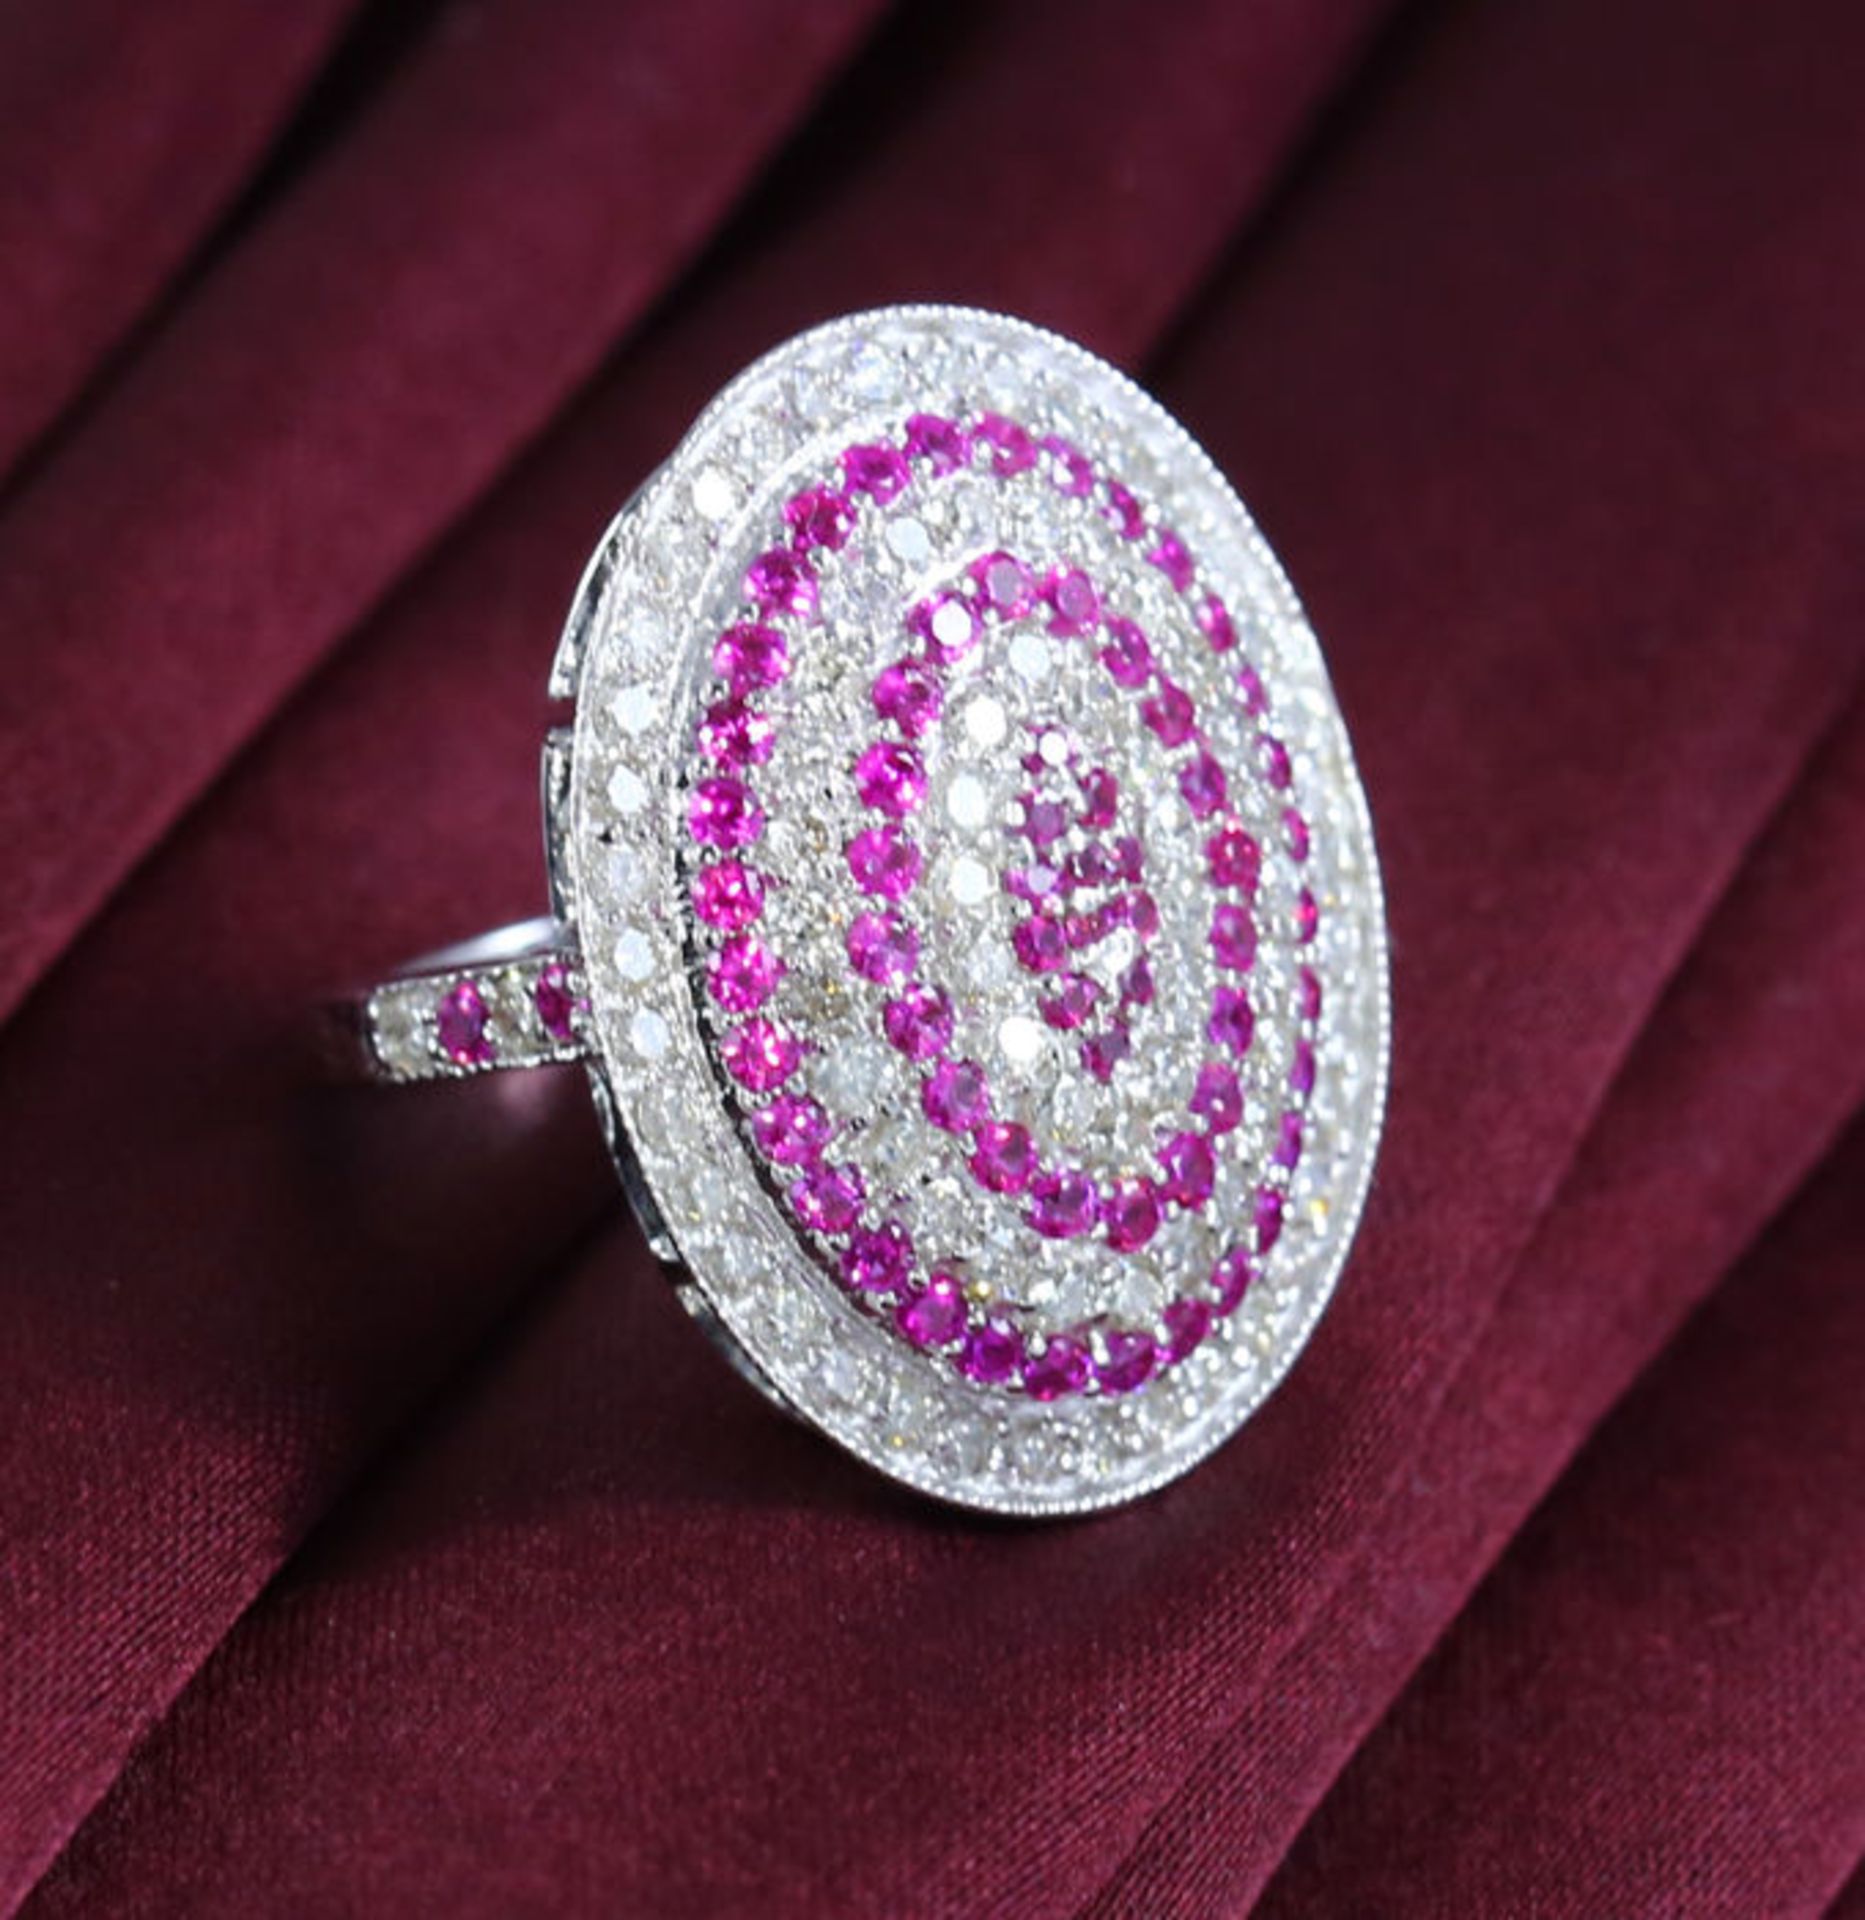 14 K / 585 Very Exclusive White Gold Diamond and Ruby Ring - Image 2 of 10